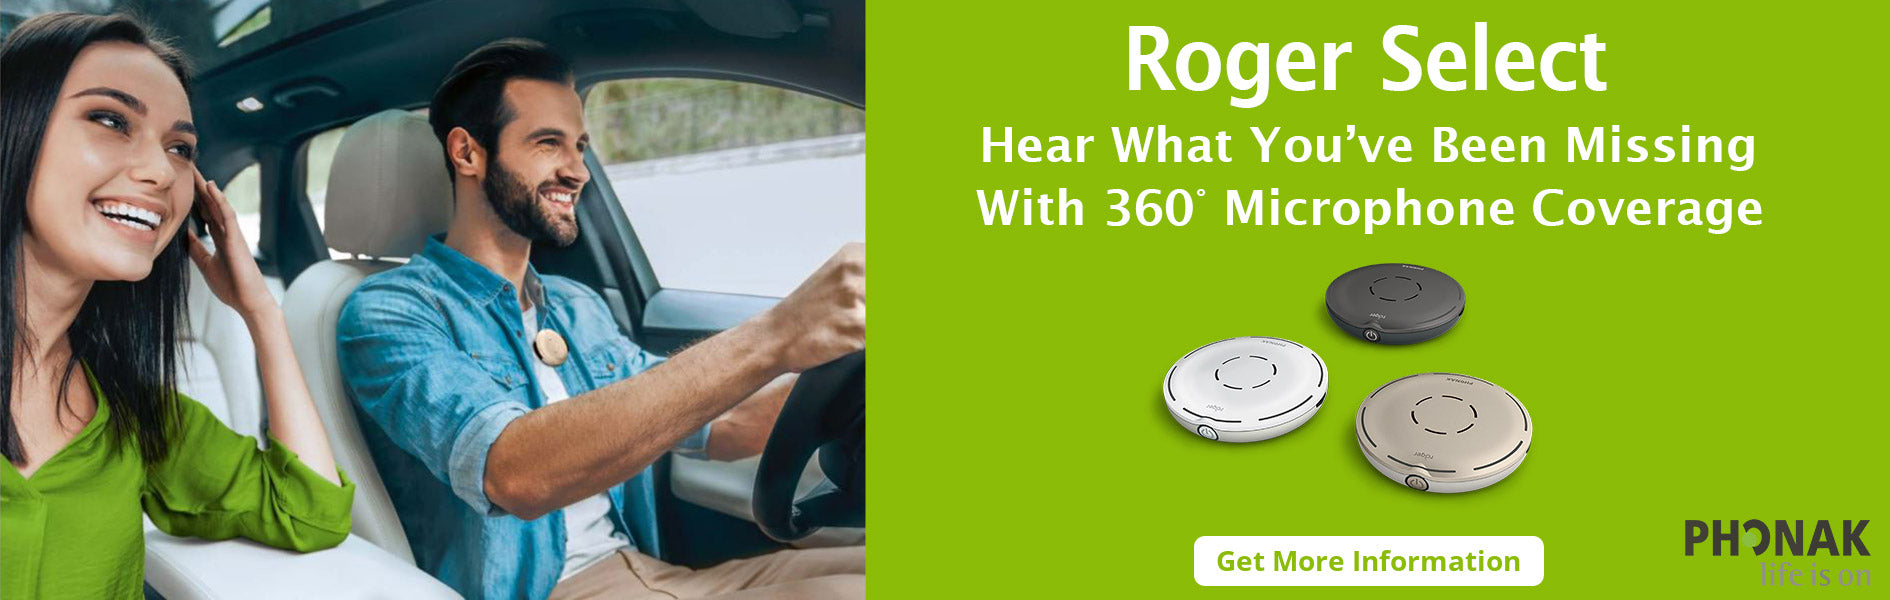 A man and a woman riding in a vehicle using the Phonak Roger Select wireless microphone.  The man has the Roger select clipped to hid shirt and the woman is listening and smiling as they drive. 